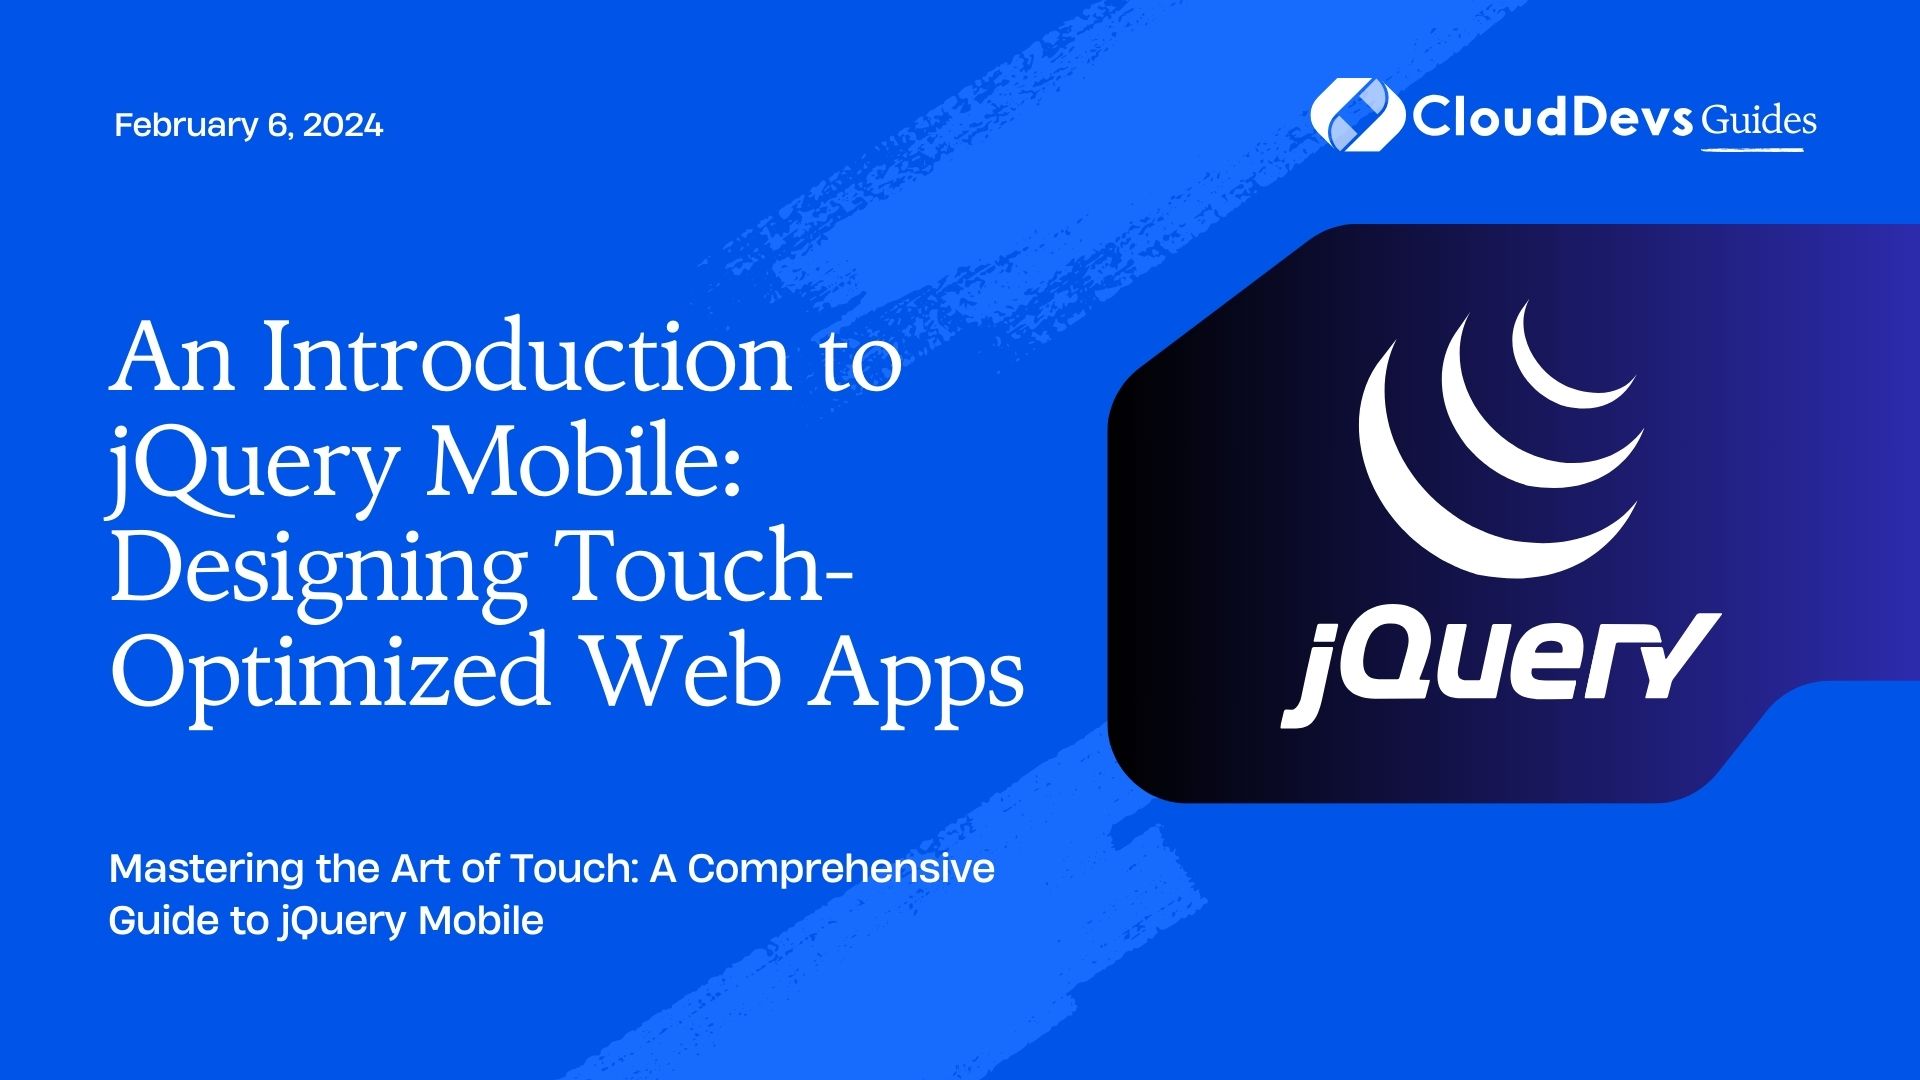 An Introduction to jQuery Mobile: Designing Touch-Optimized Web Apps